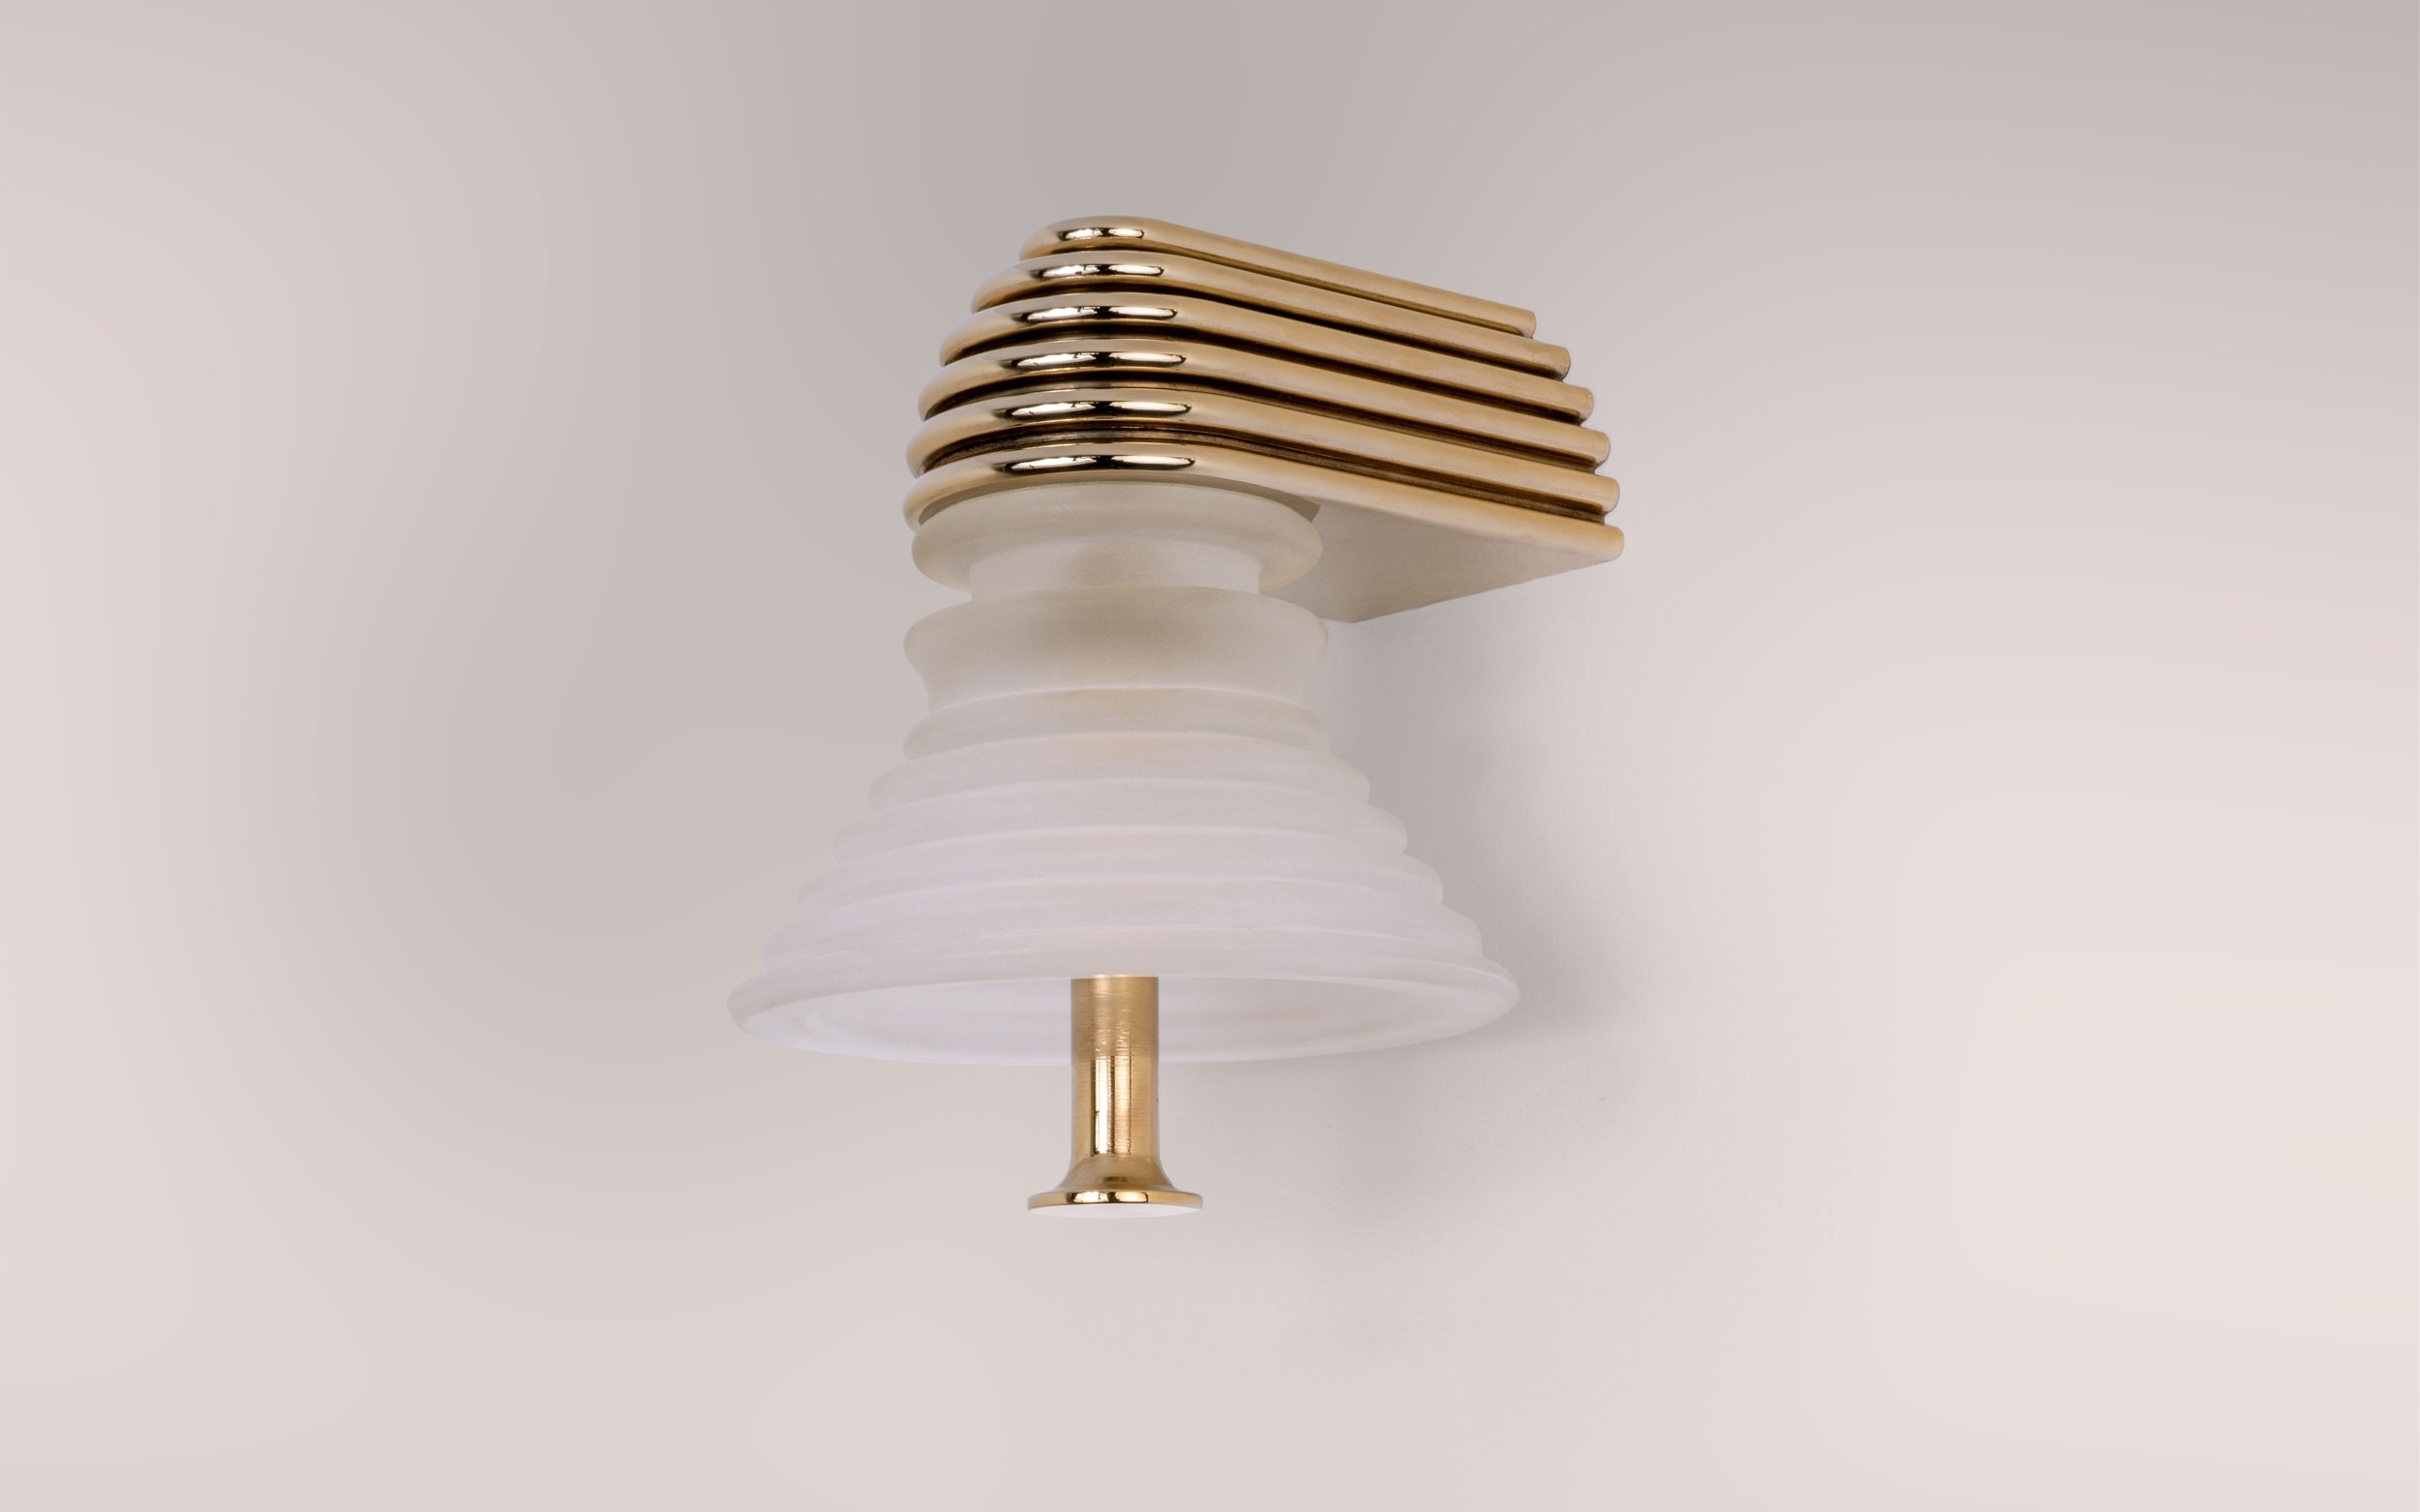 THE INSULATOR 'A' SCONCE